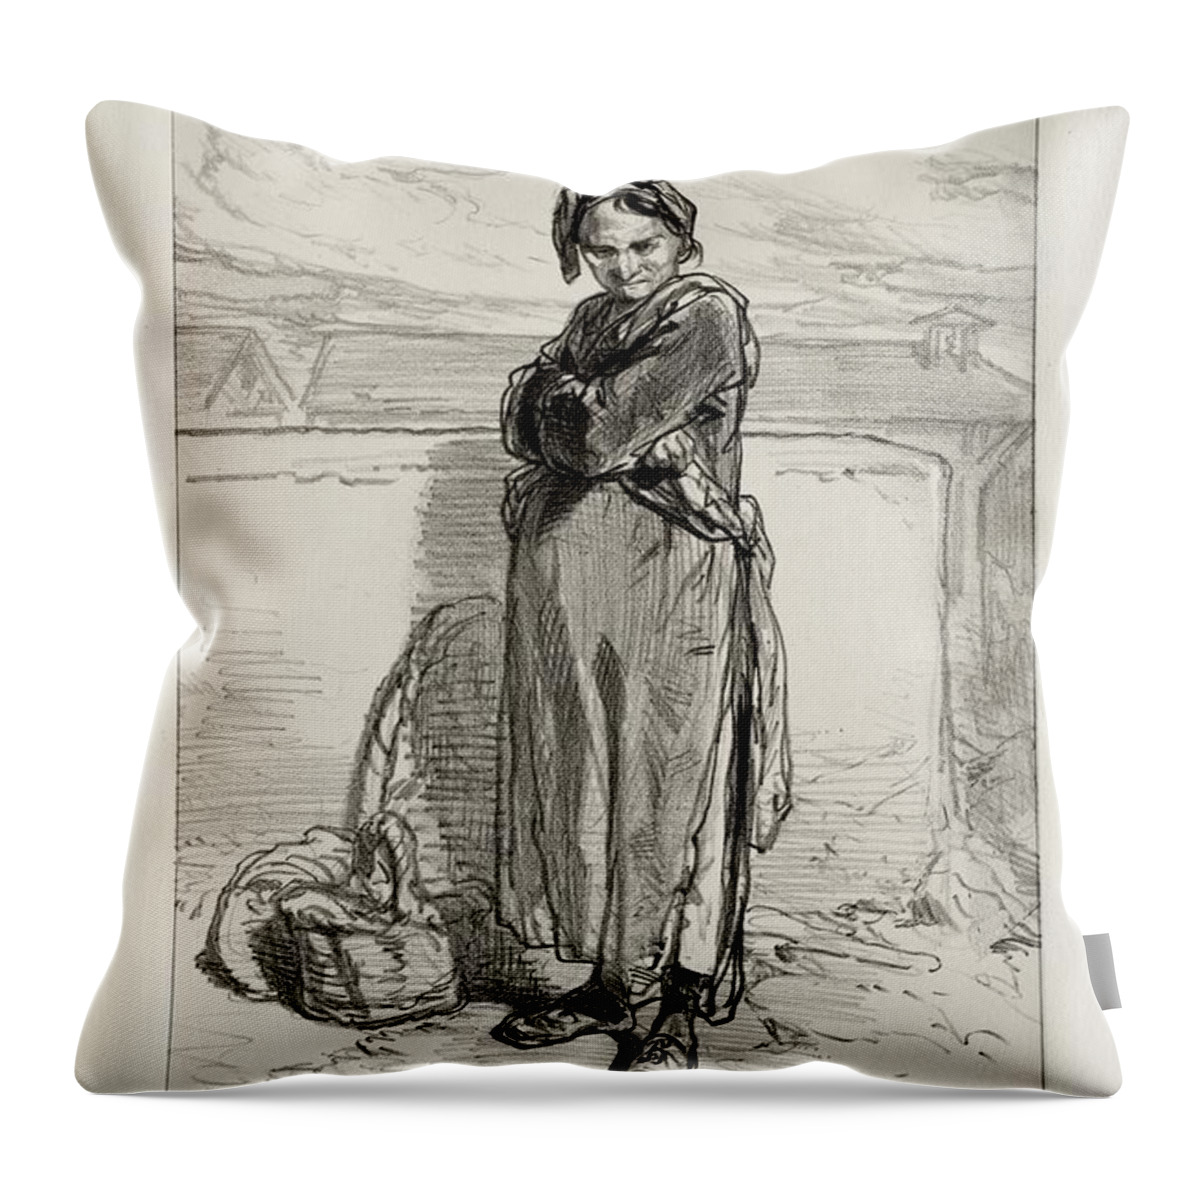 A La Halle Date Unknown Paul Gavarni French 1804 To 1866 Throw Pillow featuring the painting A la Halle Date unknown Paul Gavarni French 1804 to 1866 by MotionAge Designs